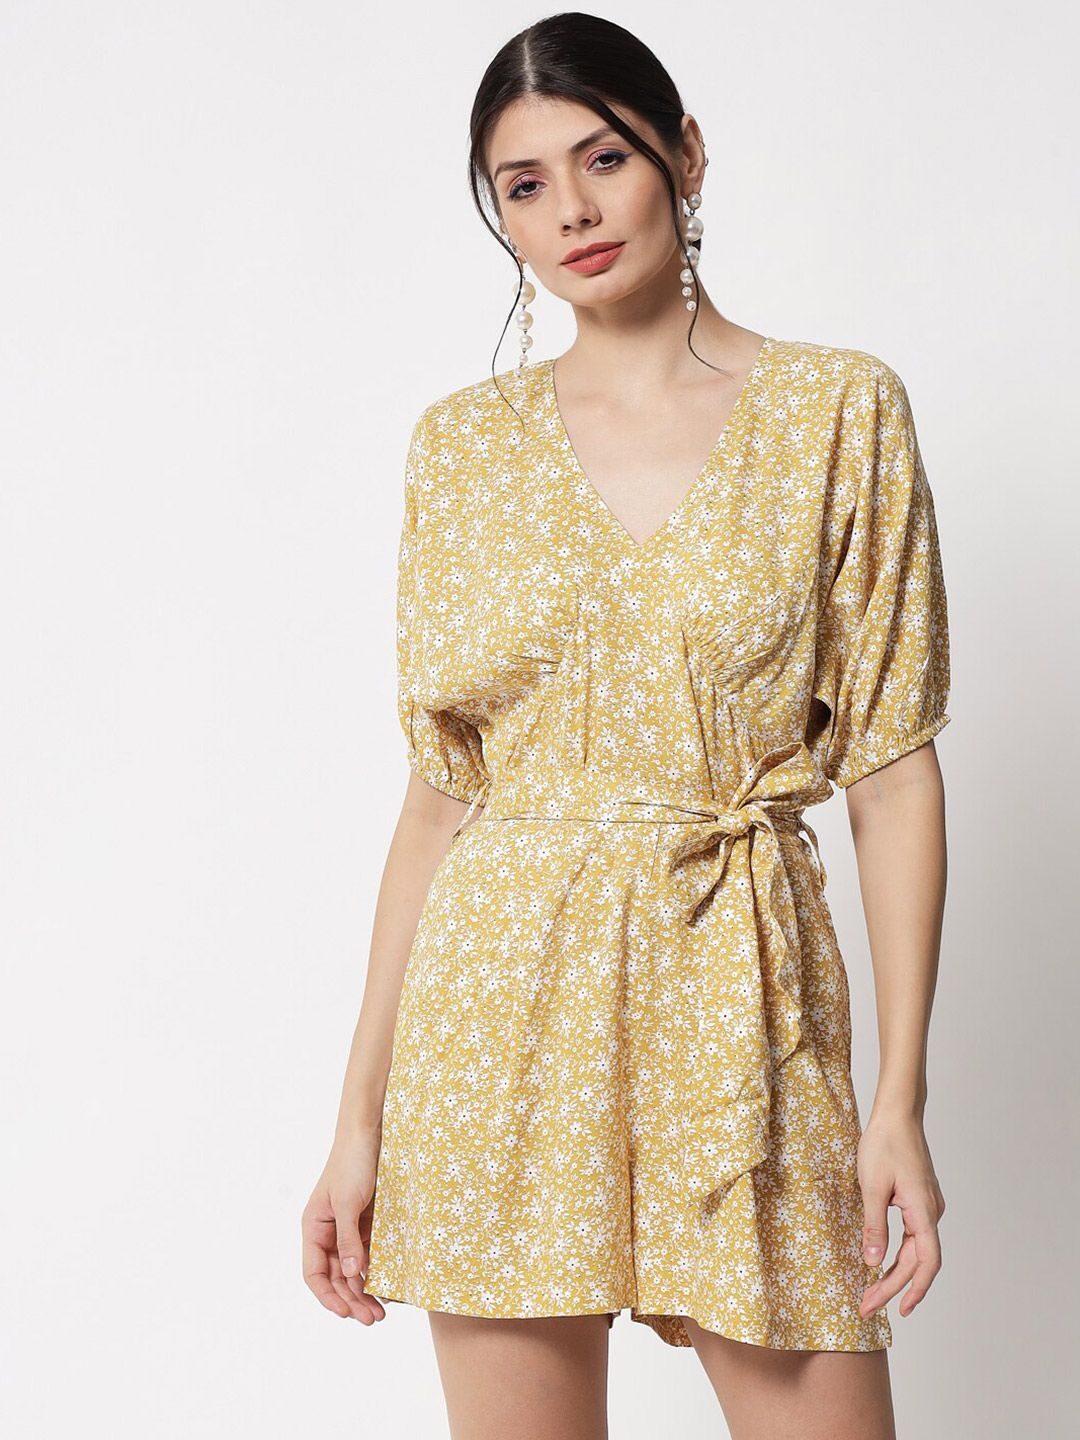 The Vanca Yellow & White Printed Playsuit Price in India